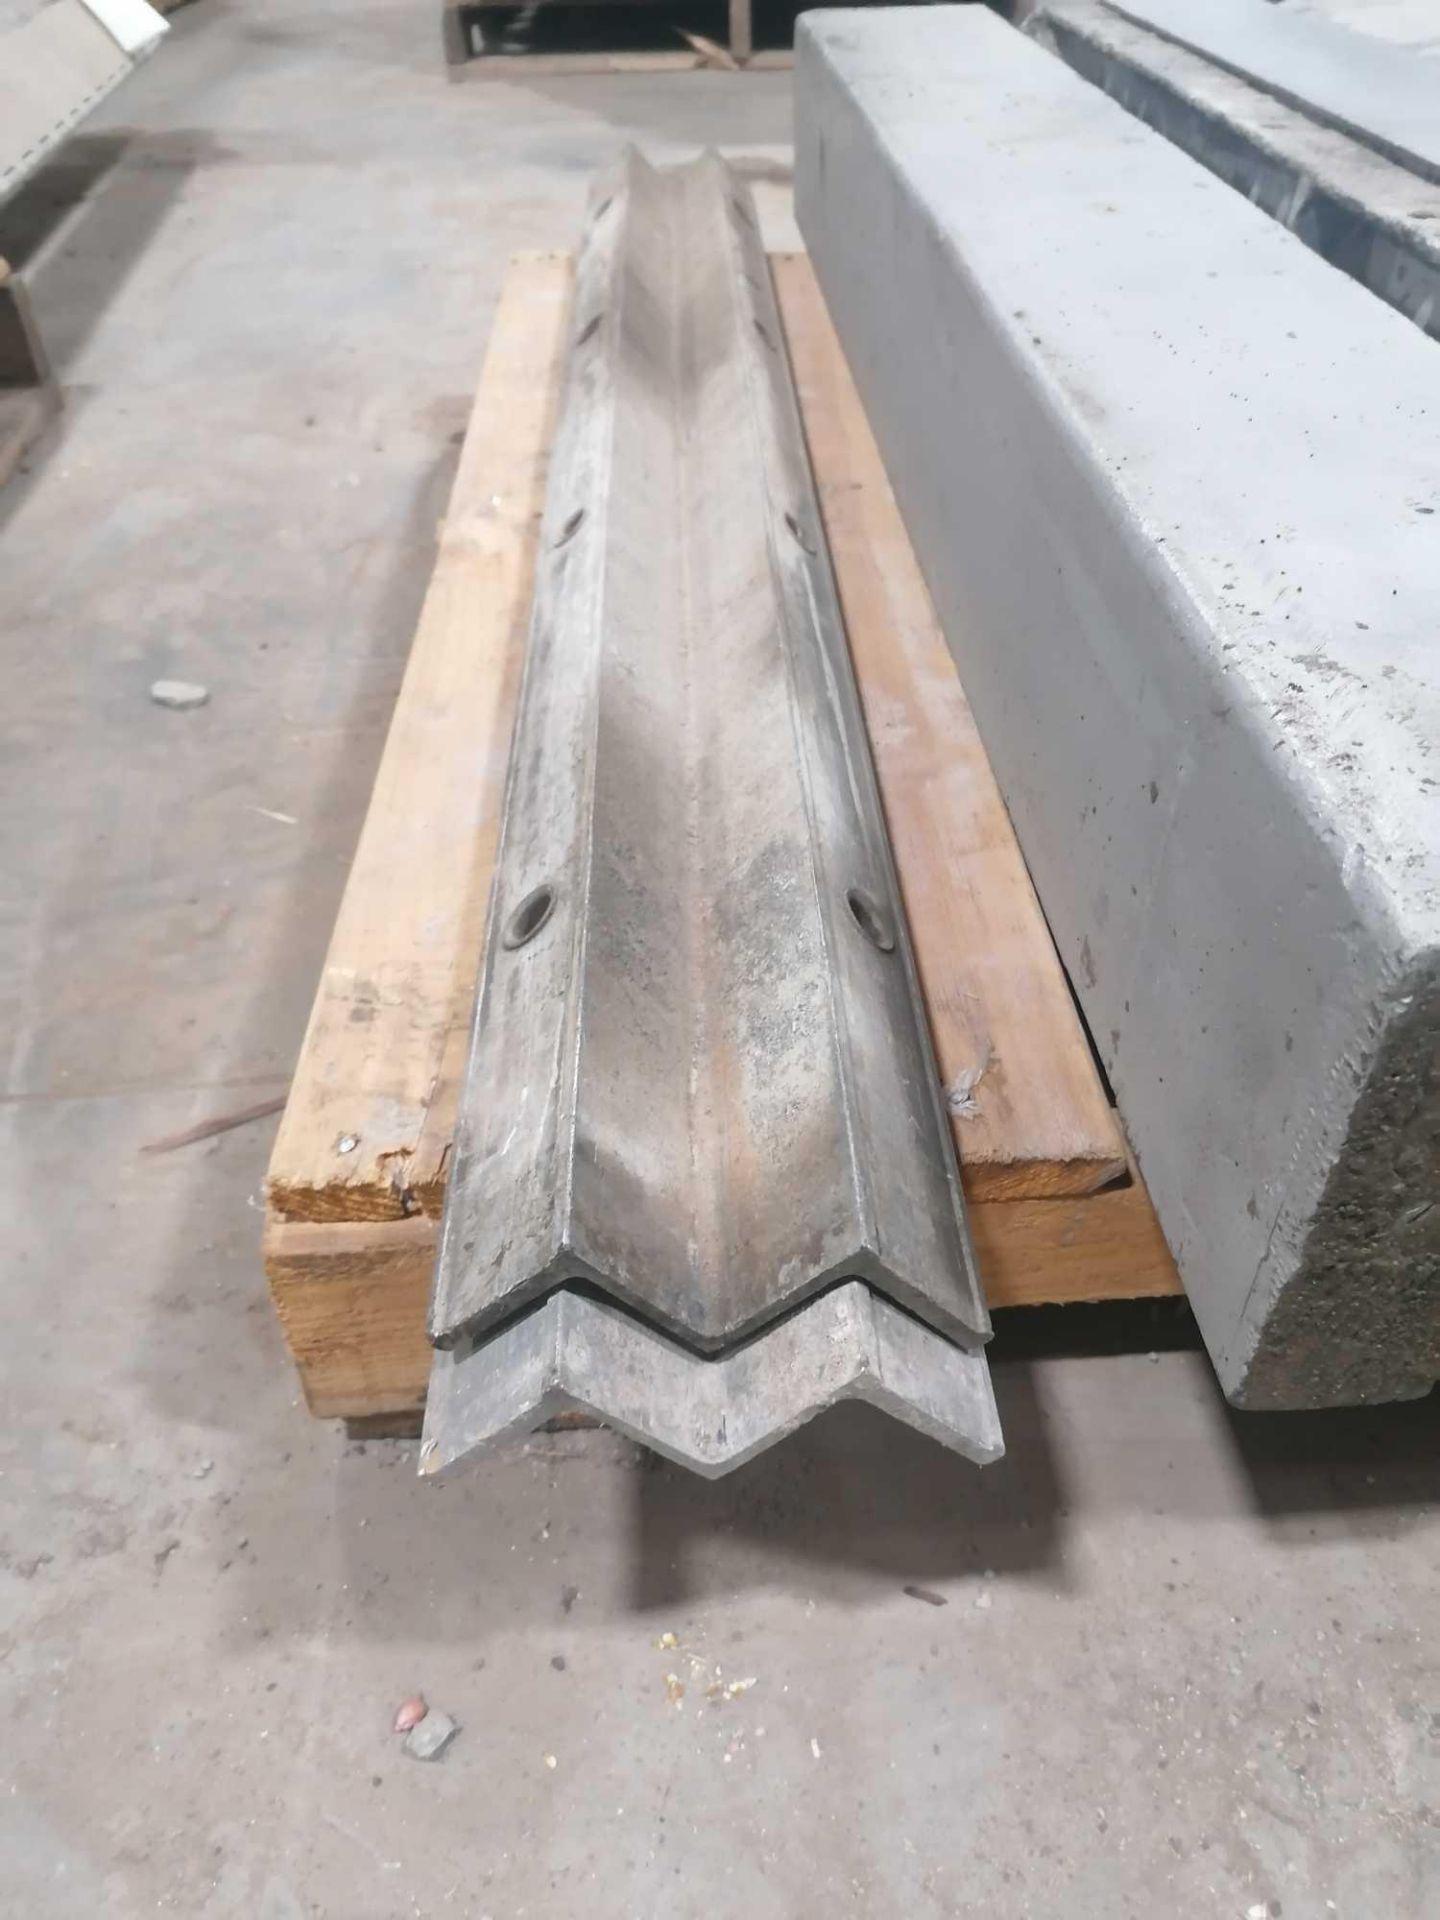 (2) 4' WS Western Aluminum Concrete Forms, Smooth 6-12 Hole Pattern. Located at 119 Spruce Street,